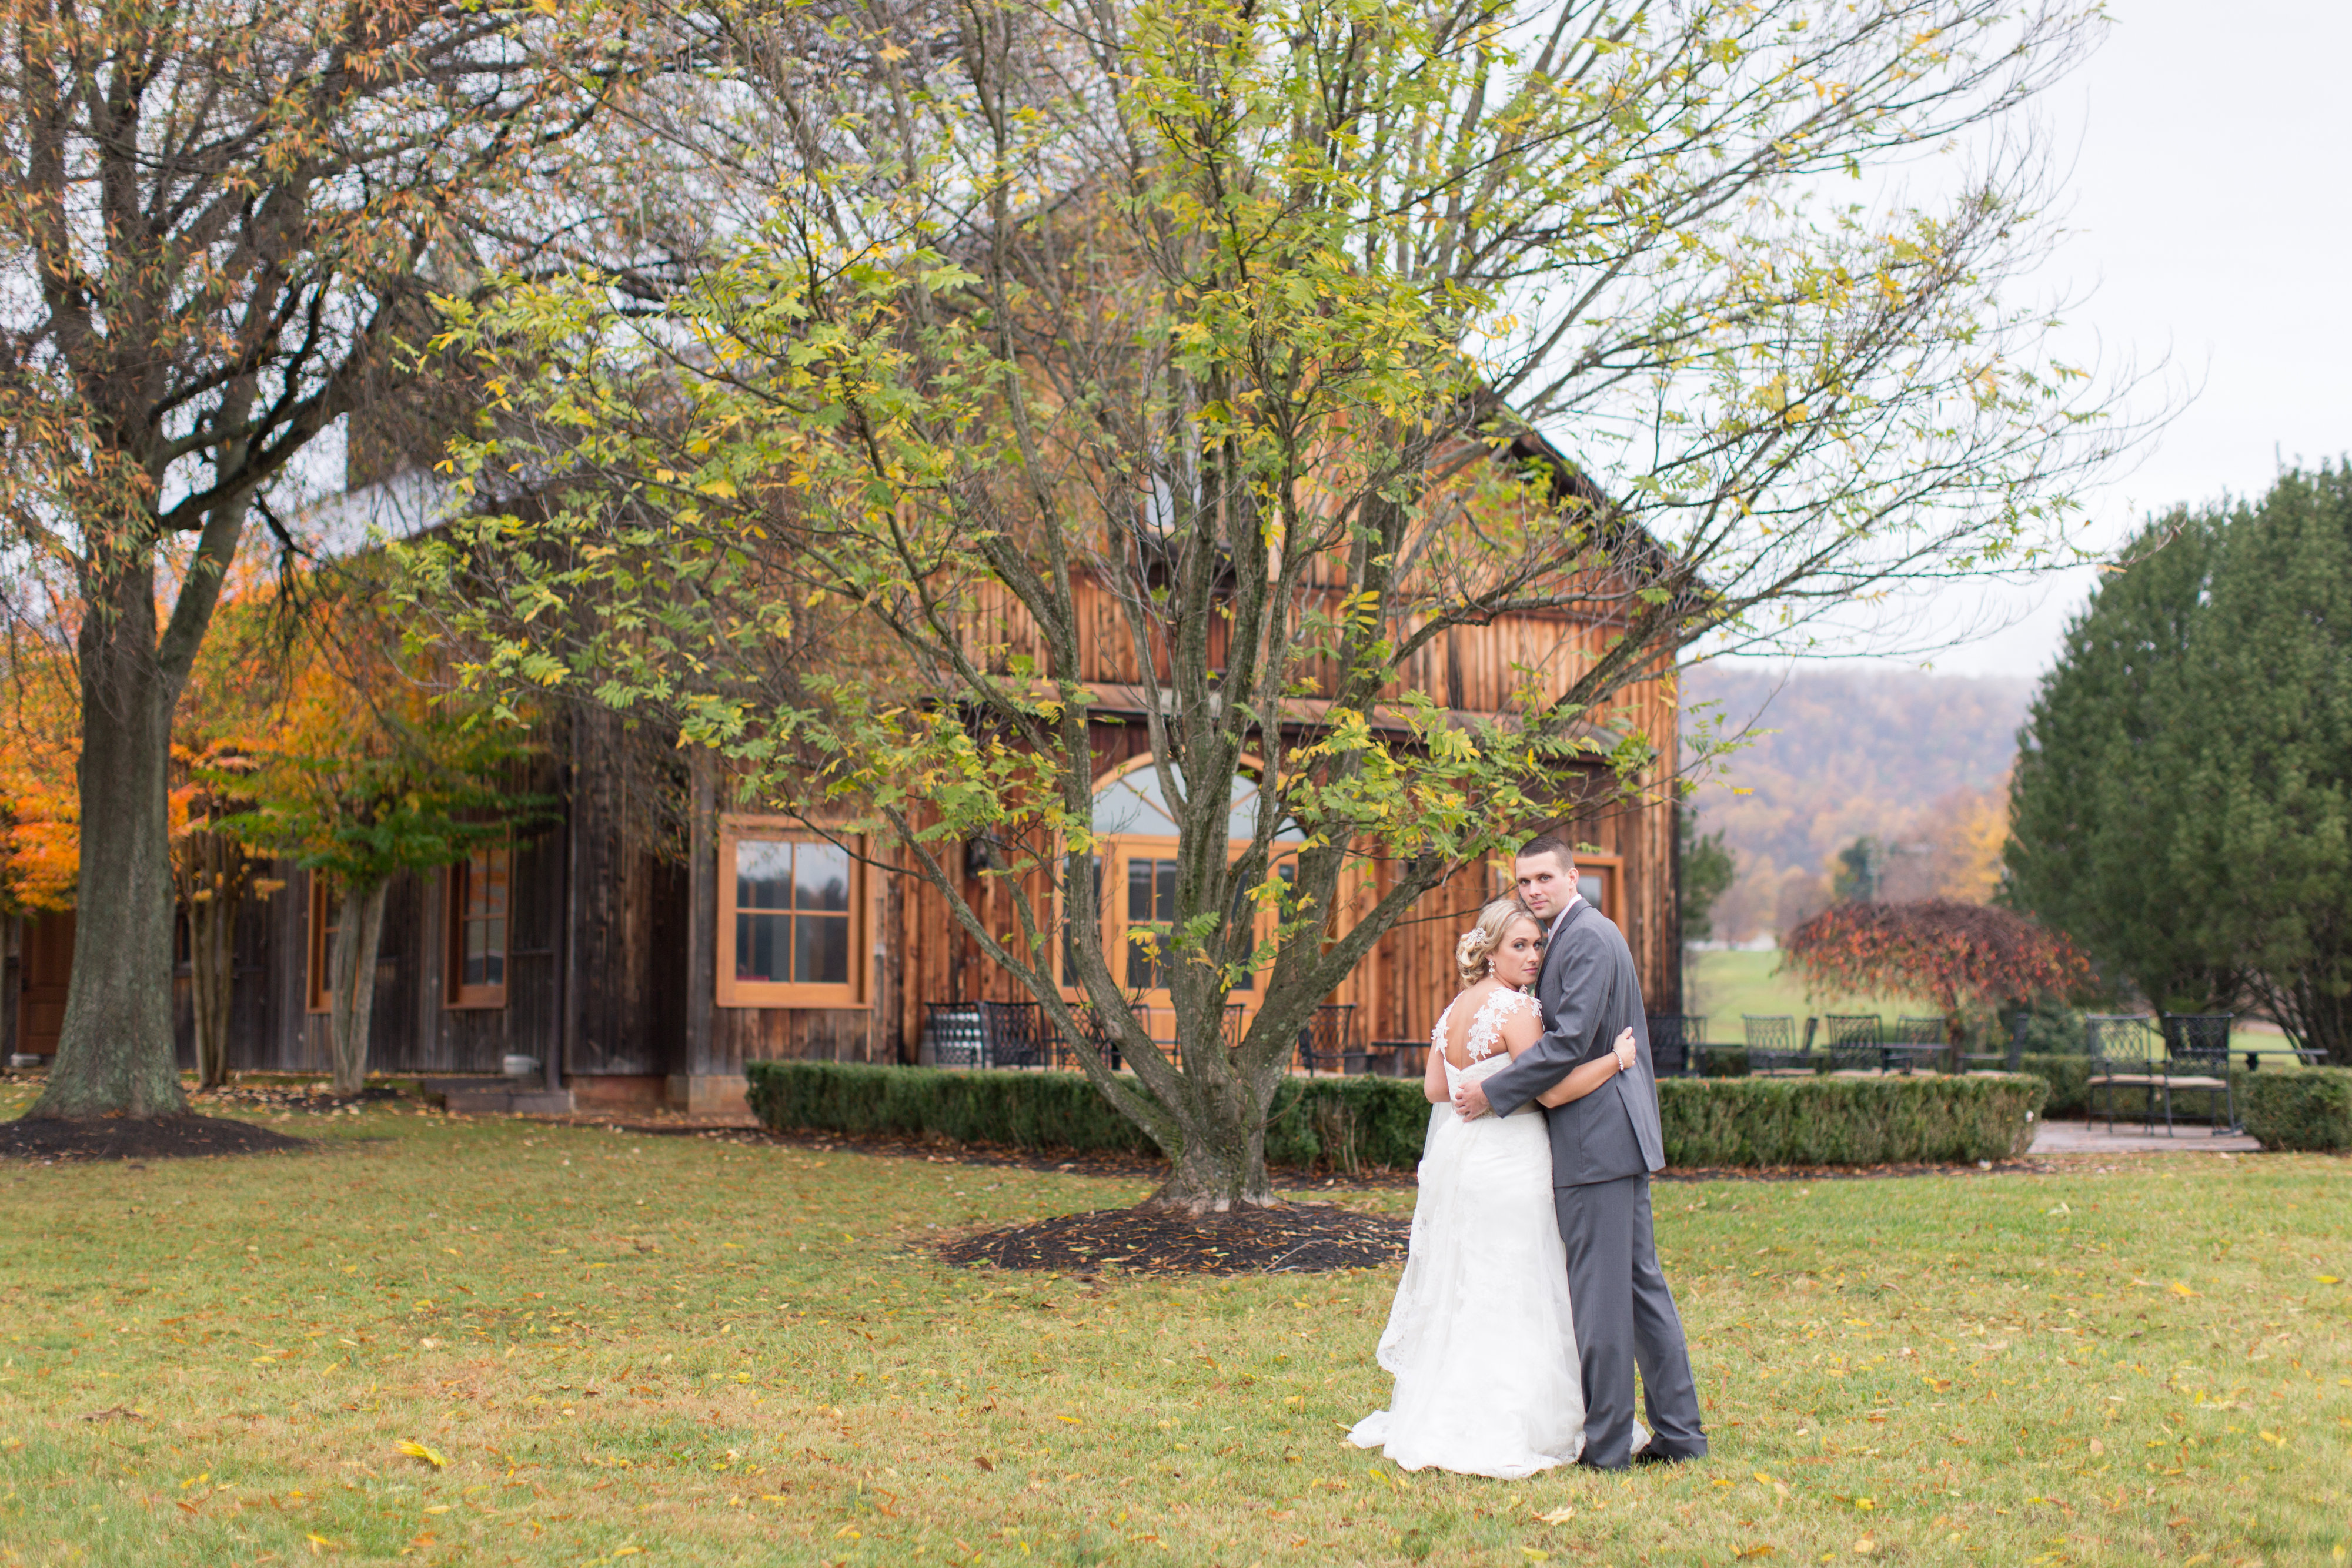 Best of 2015 Weddings | Lindsay Fauver Photography